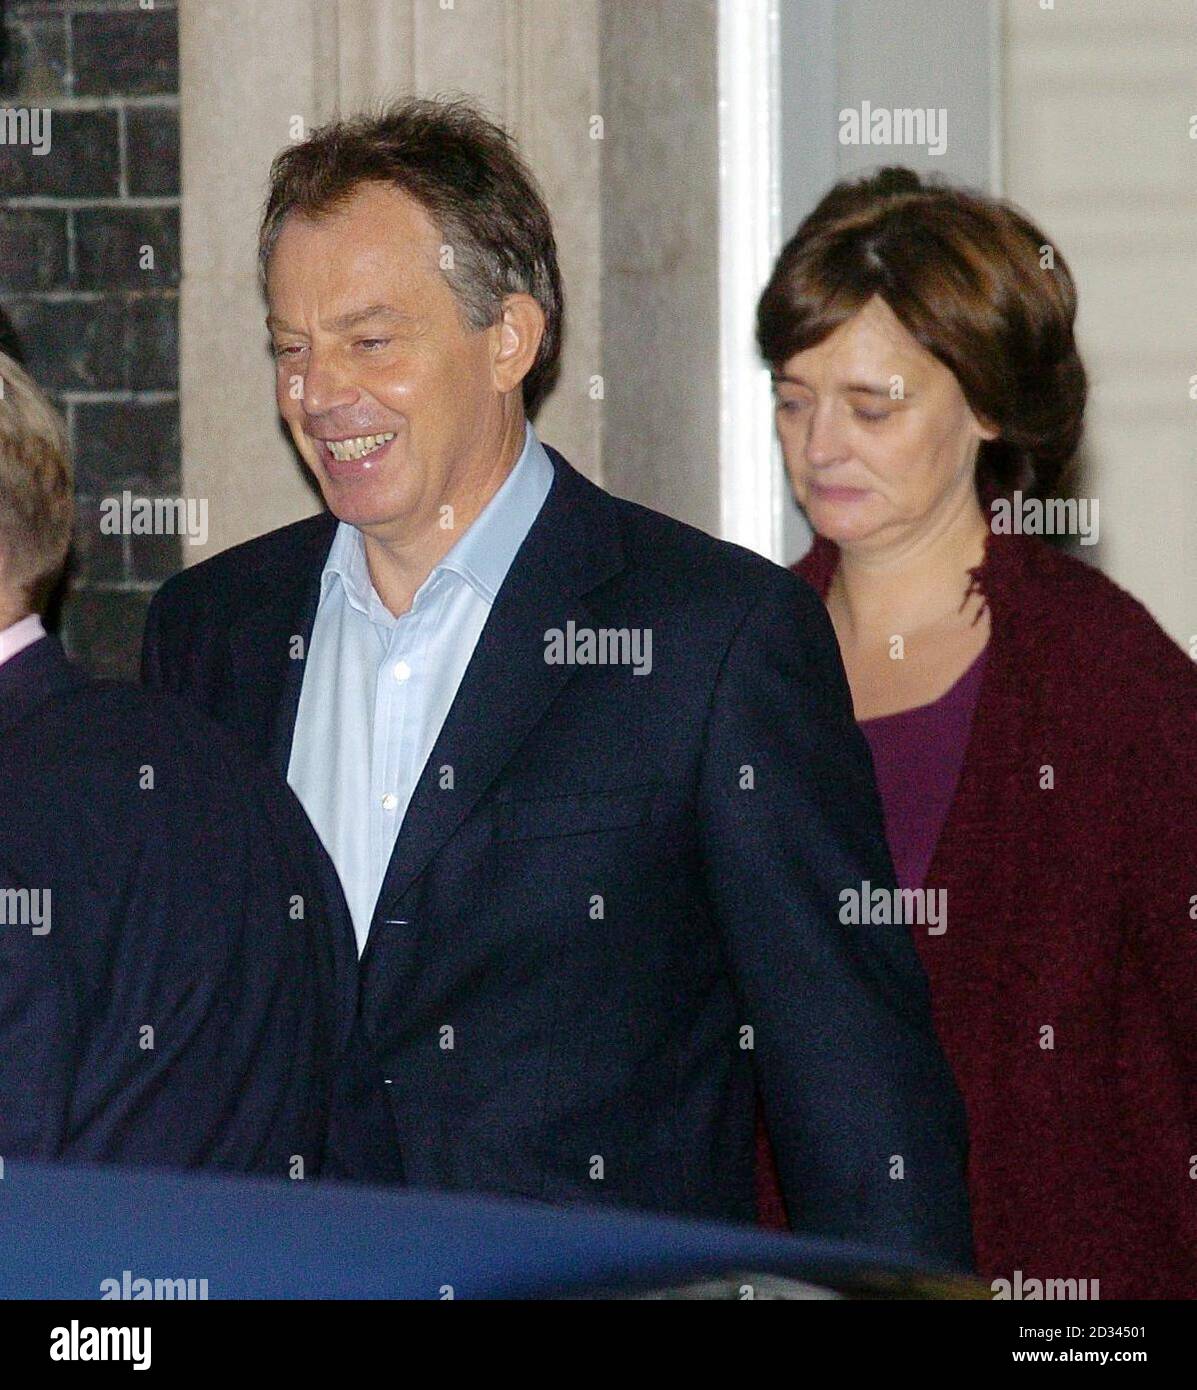 British Prime Minister Tony Blair leaves Downing Street  accompanied by his wife Cherie, to undergo treatment for a recurring heart condition. The 51-year-old Prime Minister said Thursday that he would serve a full third term, if elected, and then stand down.  Stock Photo